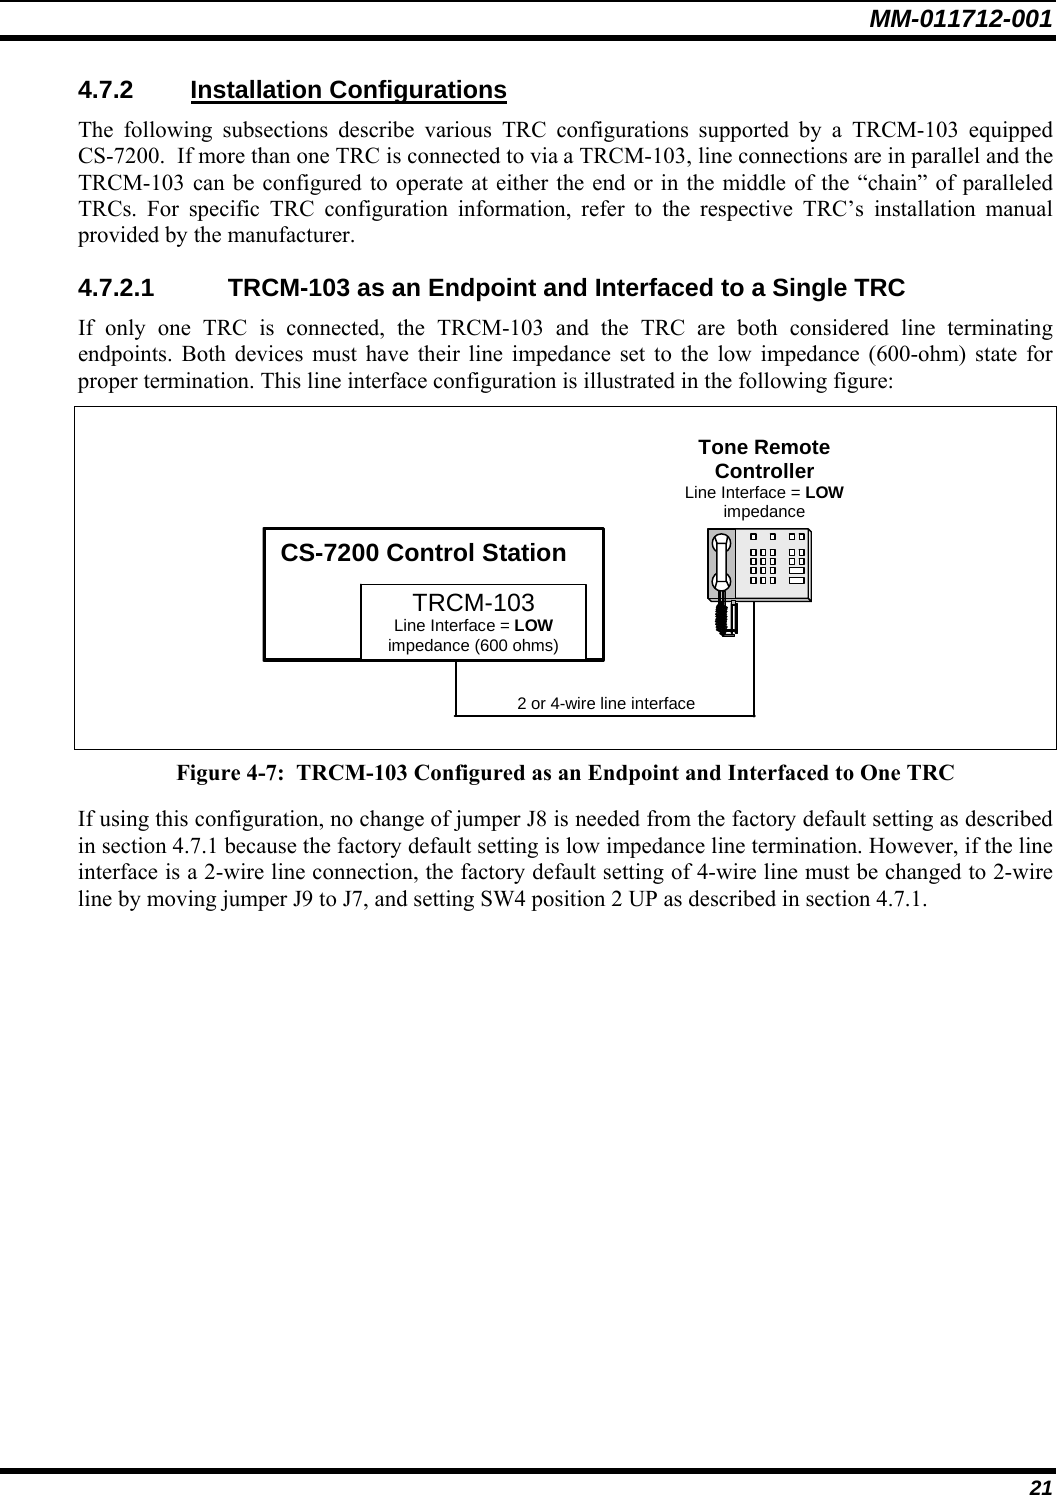 MM-011712-001 21 4.7.2 Installation Configurations The following subsections describe various TRC configurations supported by a TRCM-103 equipped CS-7200.  If more than one TRC is connected to via a TRCM-103, line connections are in parallel and the TRCM-103 can be configured to operate at either the end or in the middle of the “chain” of paralleled TRCs. For specific TRC configuration information, refer to the respective TRC’s installation manual provided by the manufacturer. 4.7.2.1  TRCM-103 as an Endpoint and Interfaced to a Single TRC If only one TRC is connected, the TRCM-103 and the TRC are both considered line terminating endpoints. Both devices must have their line impedance set to the low impedance (600-ohm) state for proper termination. This line interface configuration is illustrated in the following figure:   Tone Remote Controller Line Interface = LOW impedance CS-7200 Control Station TRCM-103 Line Interface = LOW impedance (600 ohms) 2 or 4-wire line interface   Figure 4-7:  TRCM-103 Configured as an Endpoint and Interfaced to One TRC If using this configuration, no change of jumper J8 is needed from the factory default setting as described in section 4.7.1 because the factory default setting is low impedance line termination. However, if the line interface is a 2-wire line connection, the factory default setting of 4-wire line must be changed to 2-wire line by moving jumper J9 to J7, and setting SW4 position 2 UP as described in section 4.7.1. 